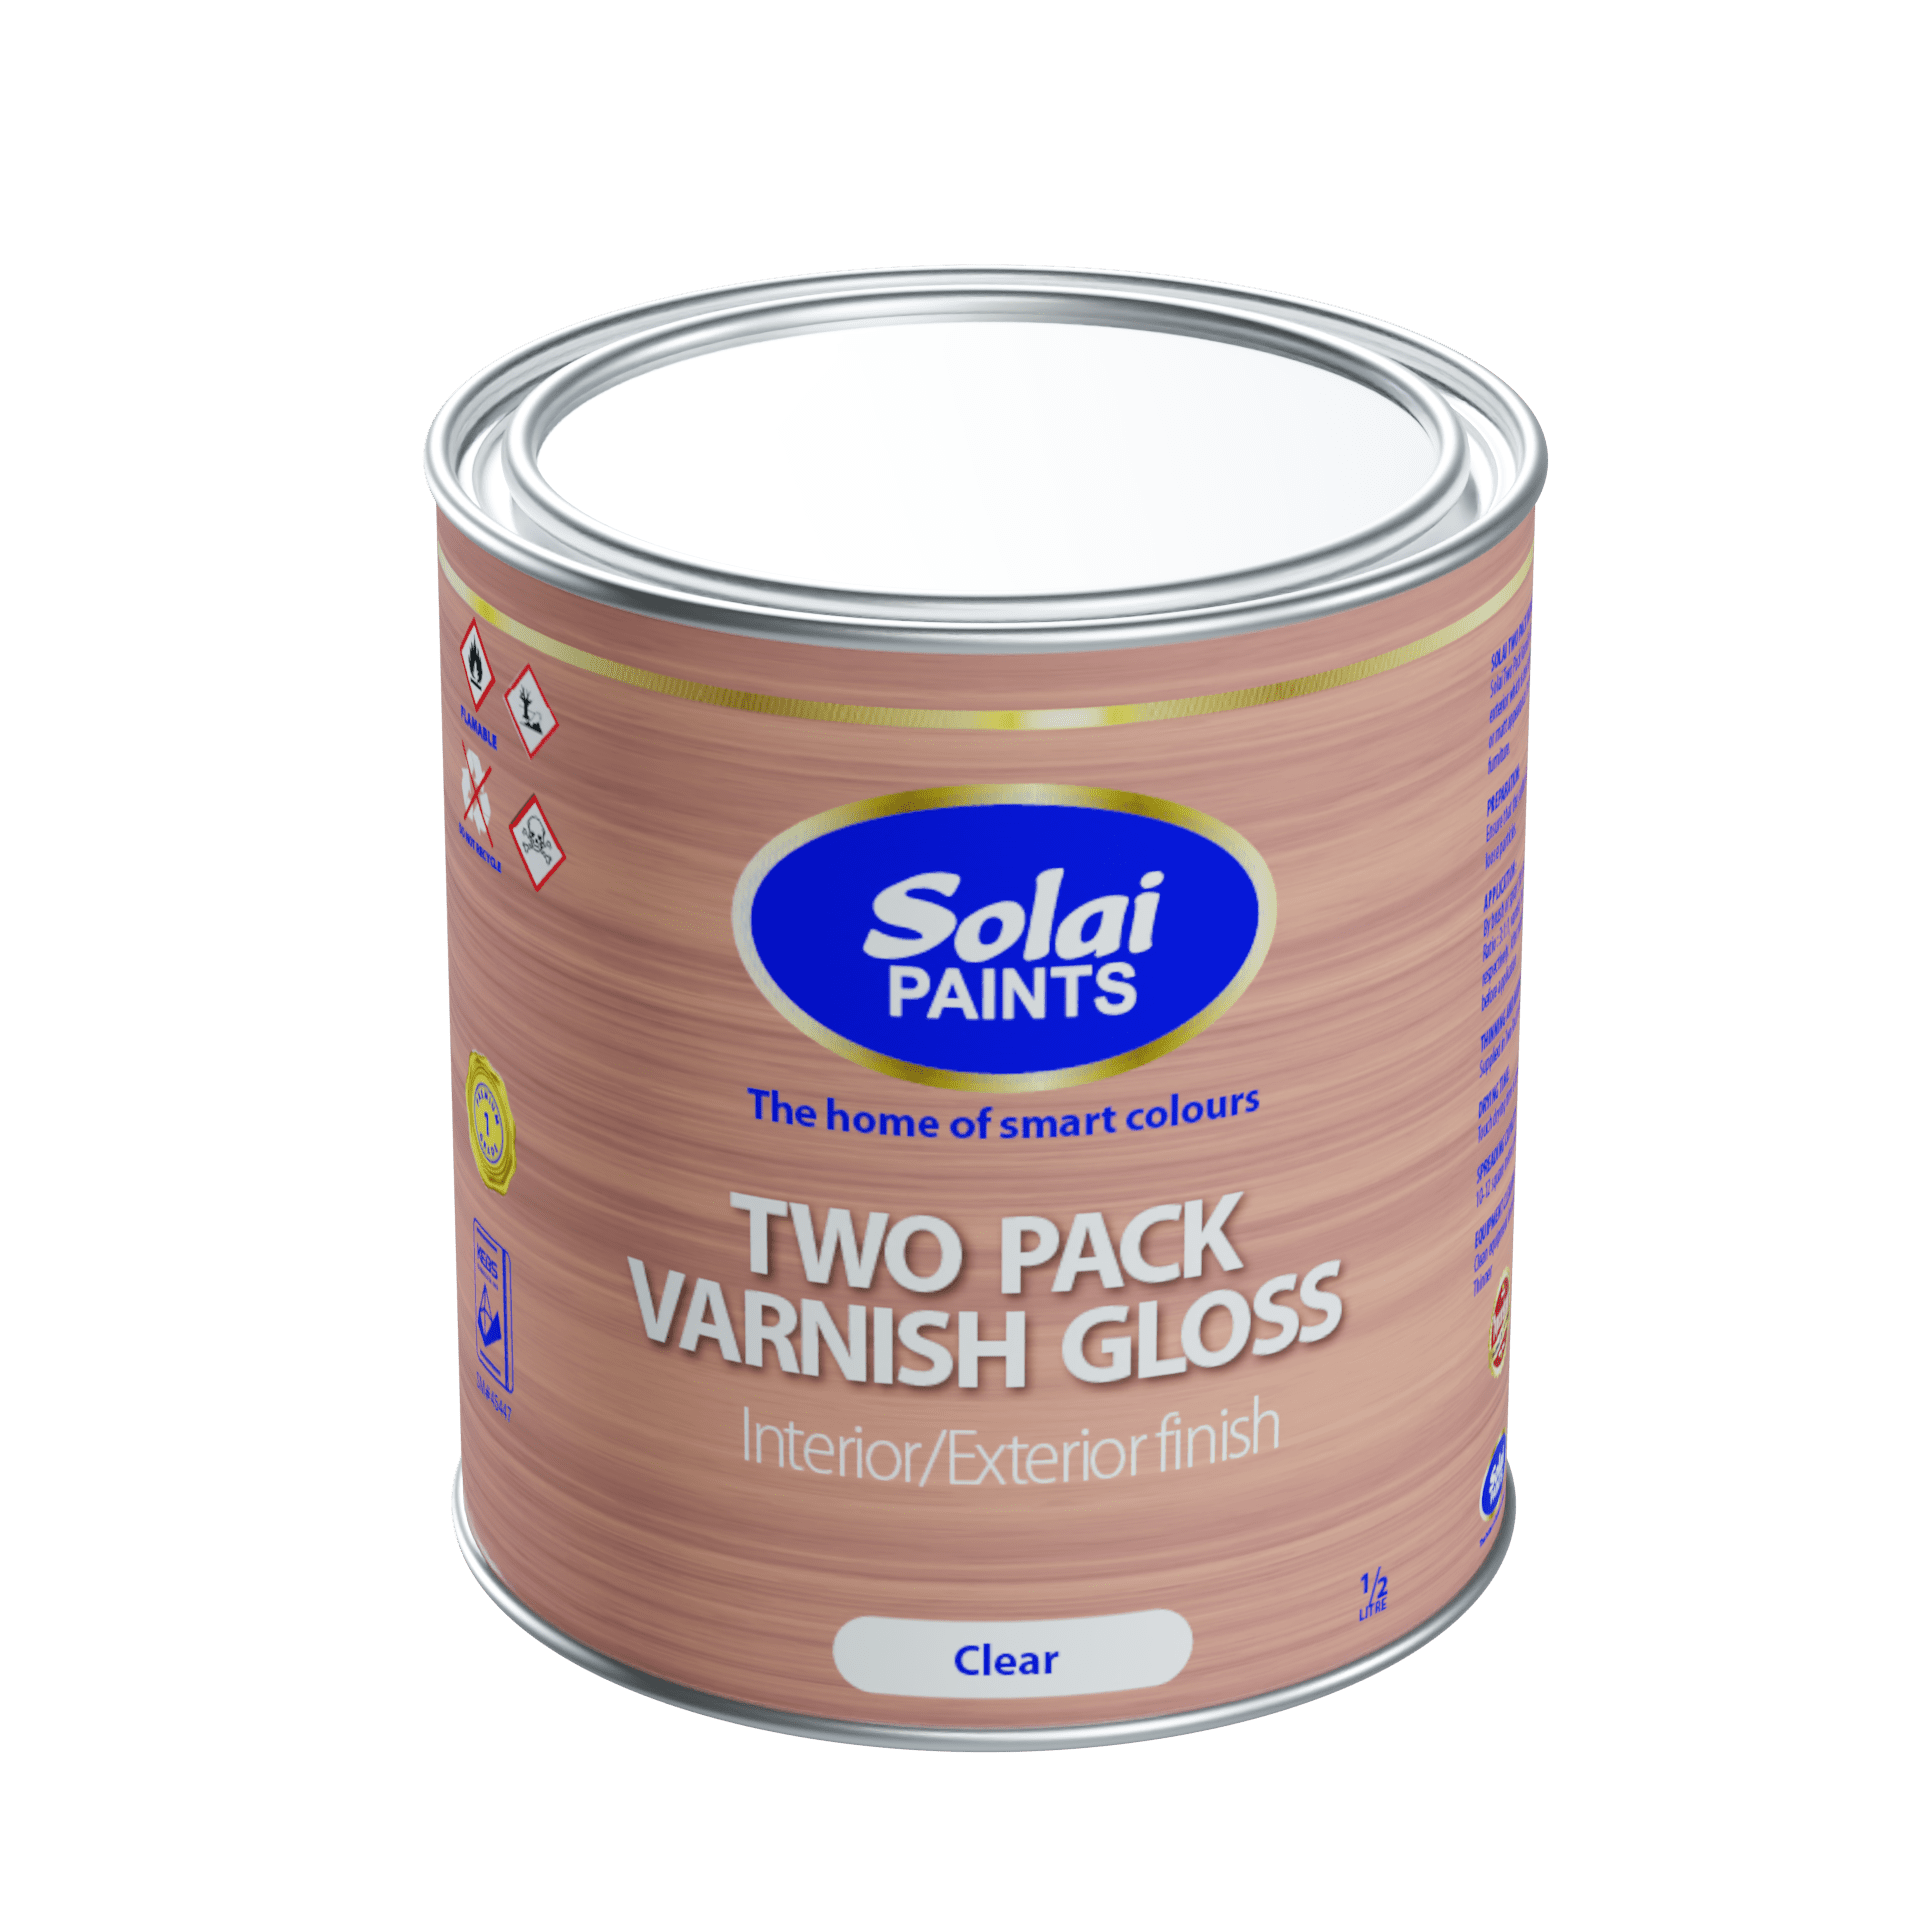 Two Pack Varnish Gloss, High quality interior and exterior varnish, Best Two Pack Varnish, Quality Two Pack Varnish, Most durable wood finish, Quality wood finish.